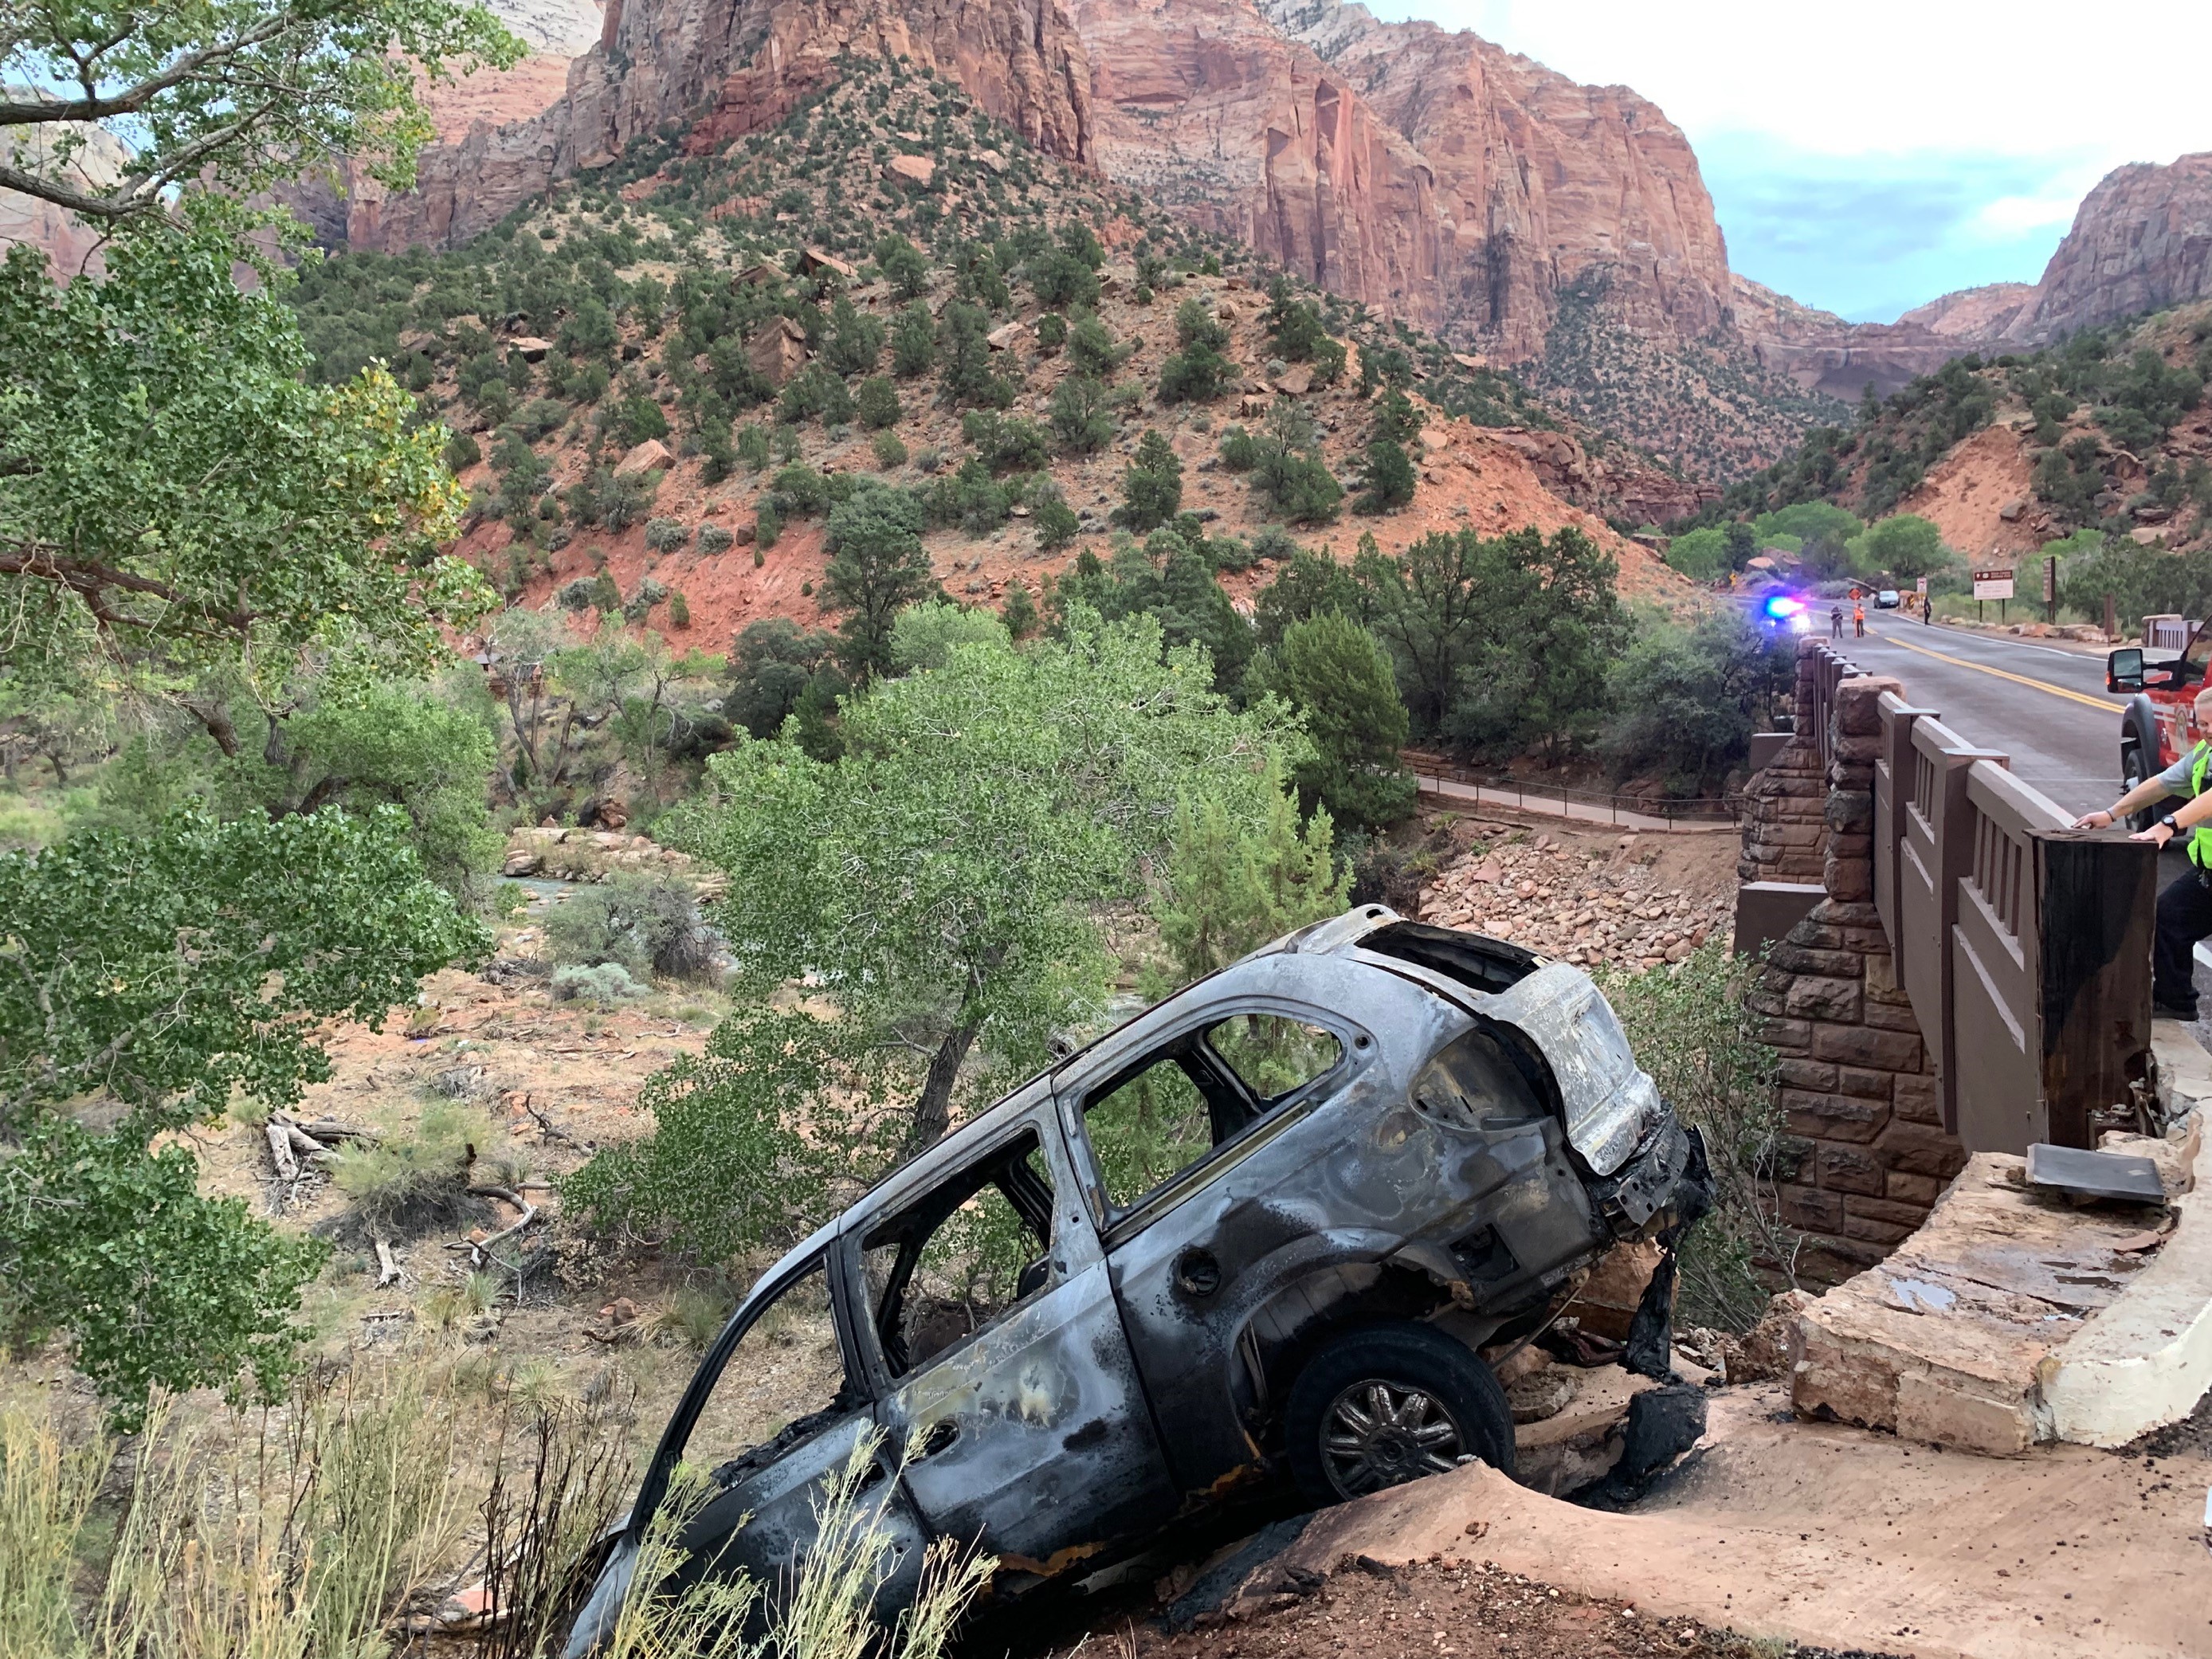 ZION_Burned Car_Canyon Junction_8_31_2021